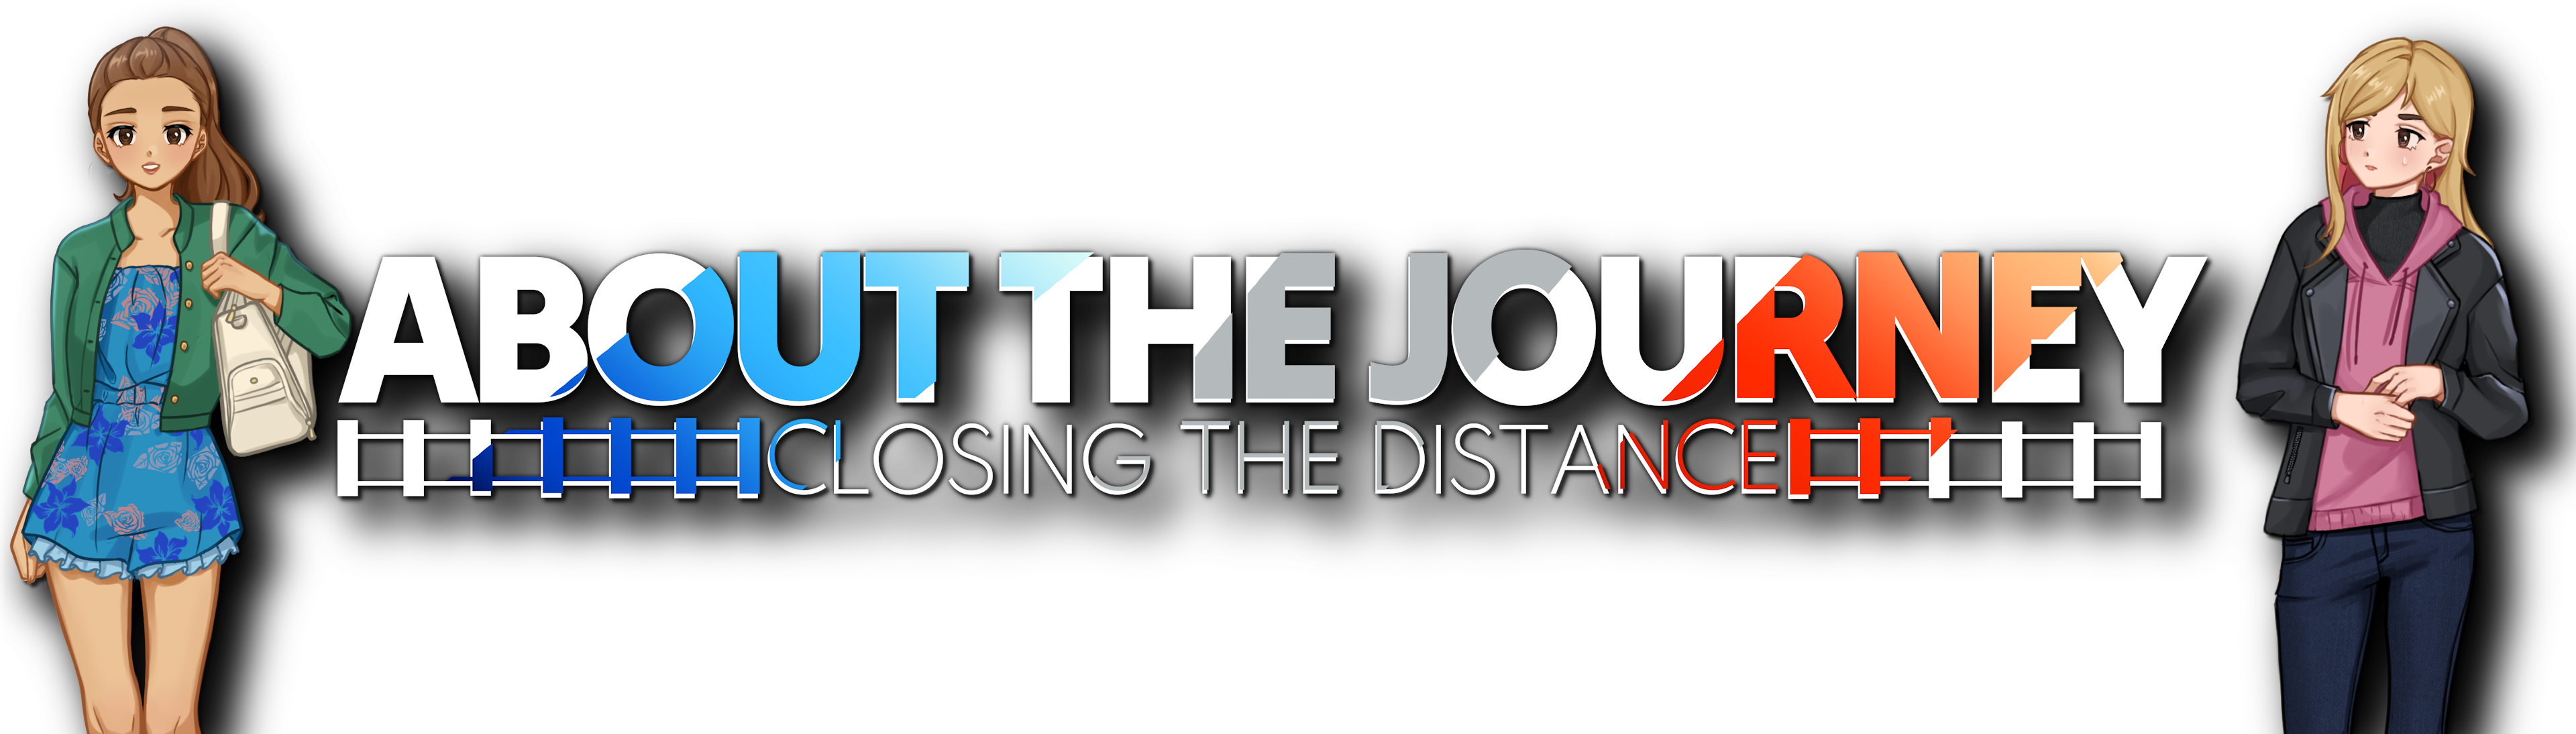 About the Journey: Closing the Distance